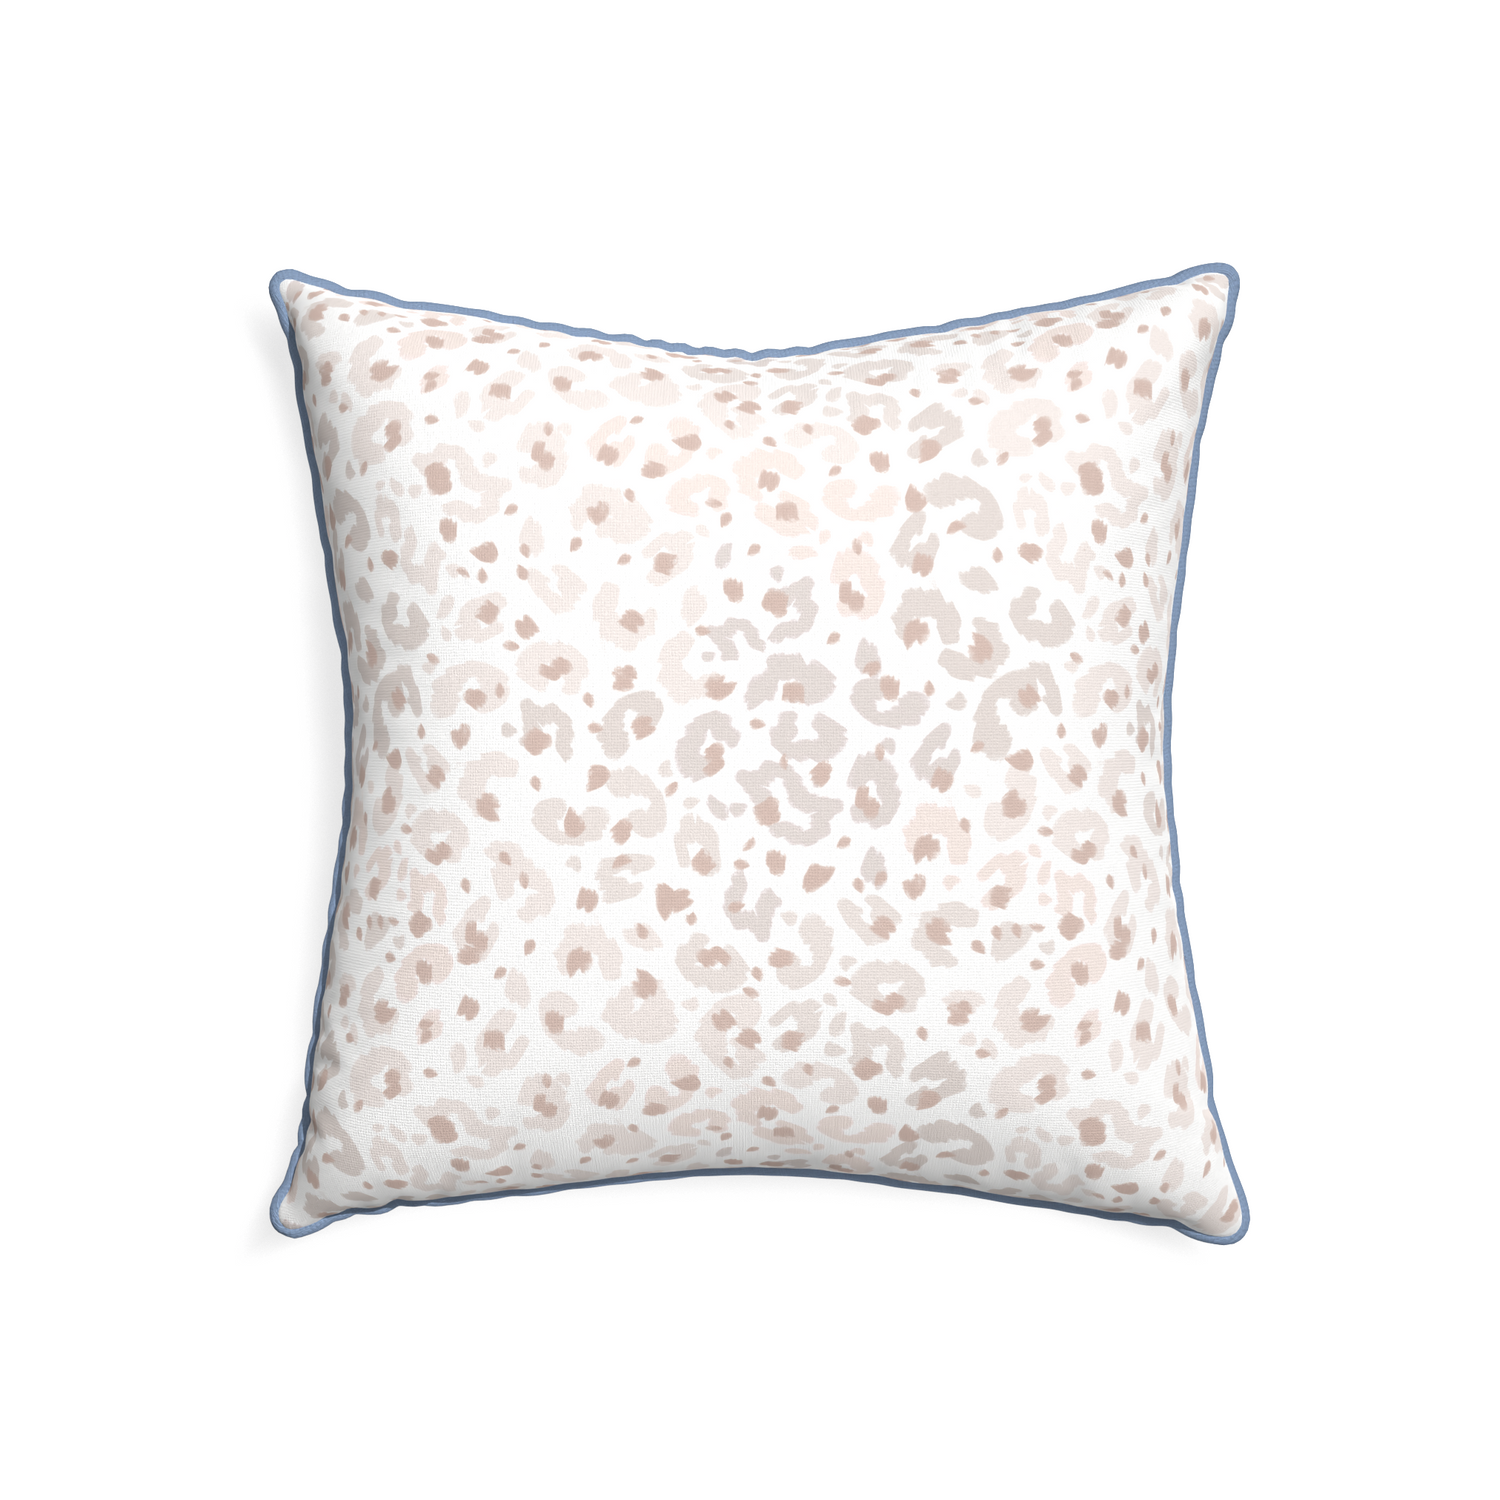 22-square rosie custom beige animal printpillow with sky piping on white background